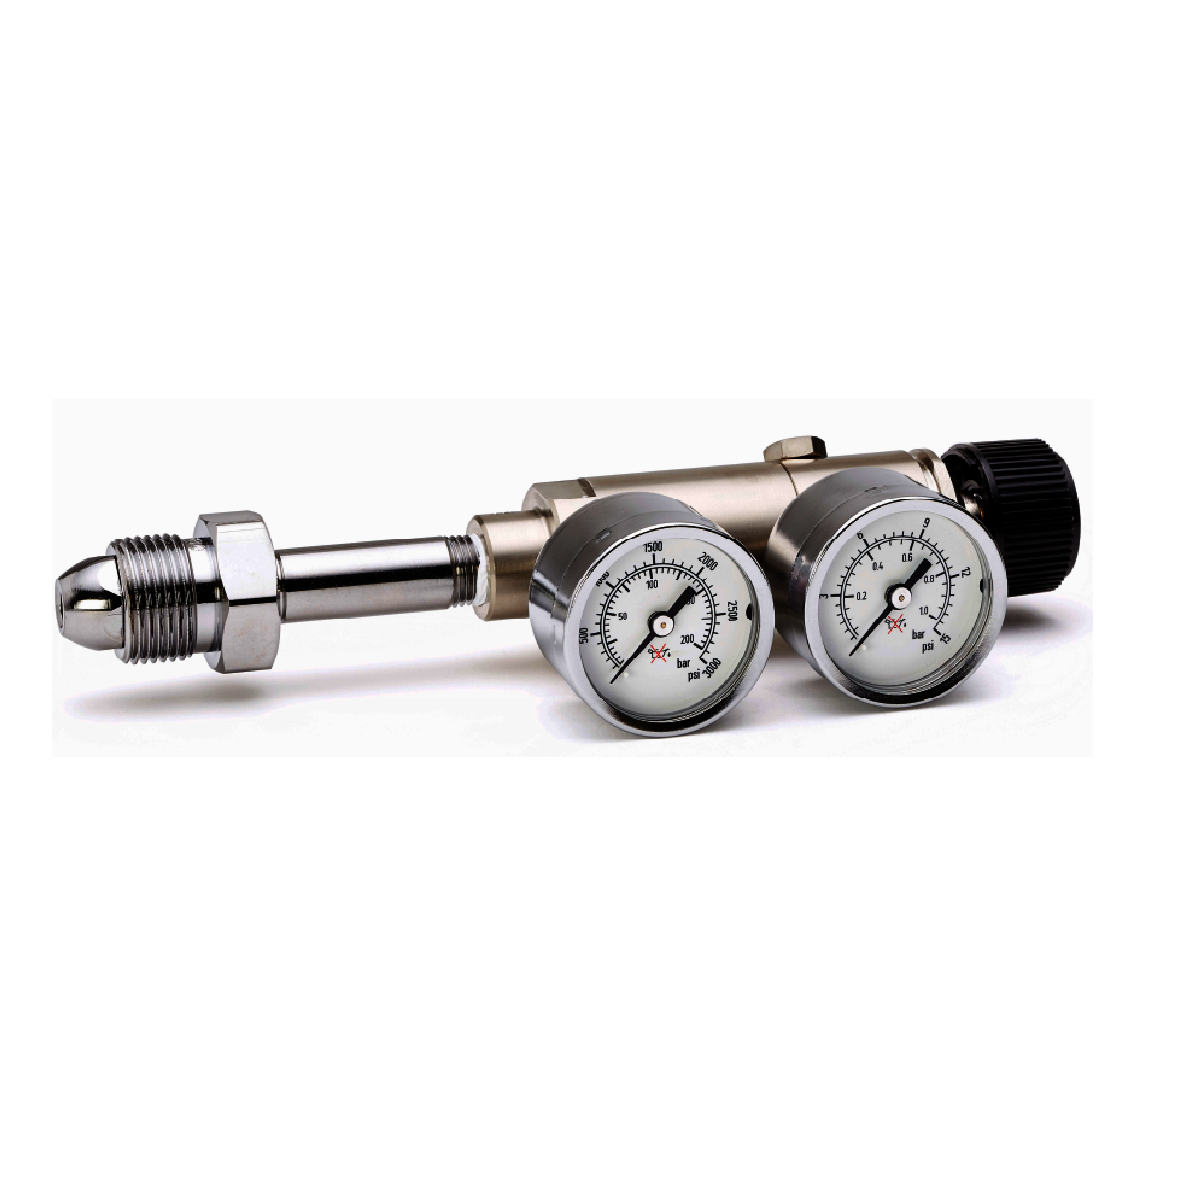 Airgas Model 14B350 Nickel-Plated Brass High Purity Two Stage Regulator With CGA-350 Connection